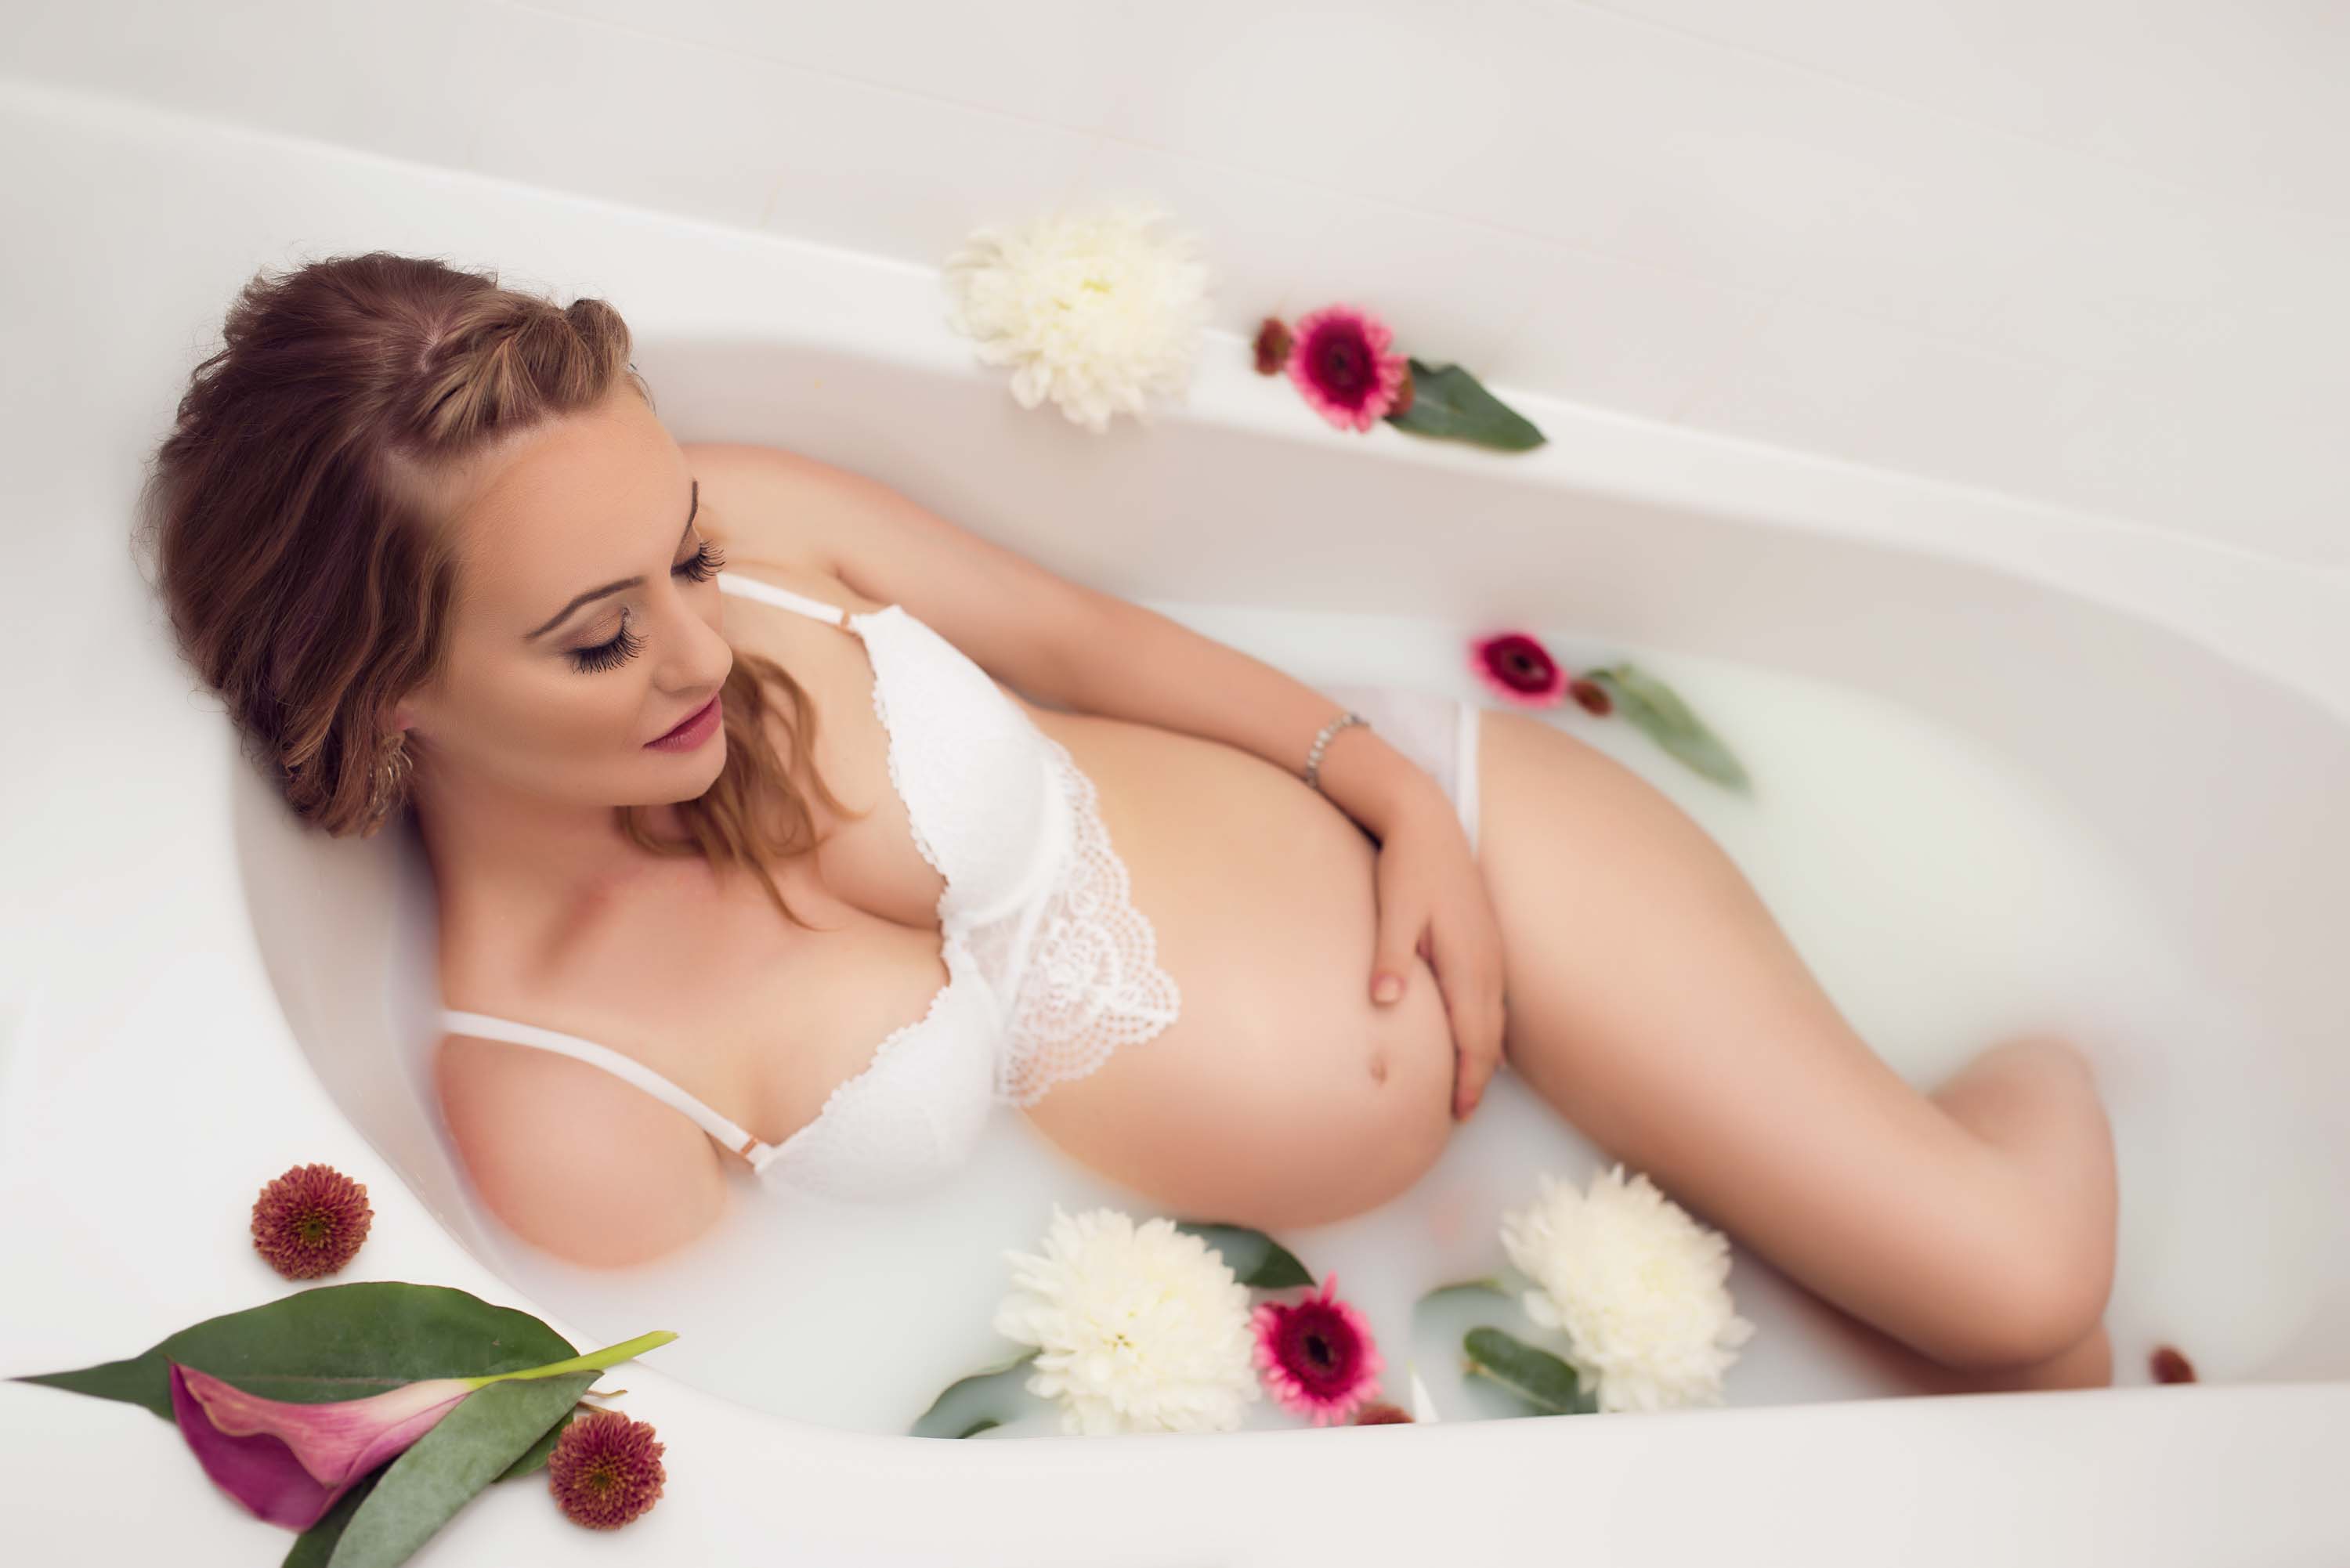 Lady with baby bump in milk bath with purple and white flowers